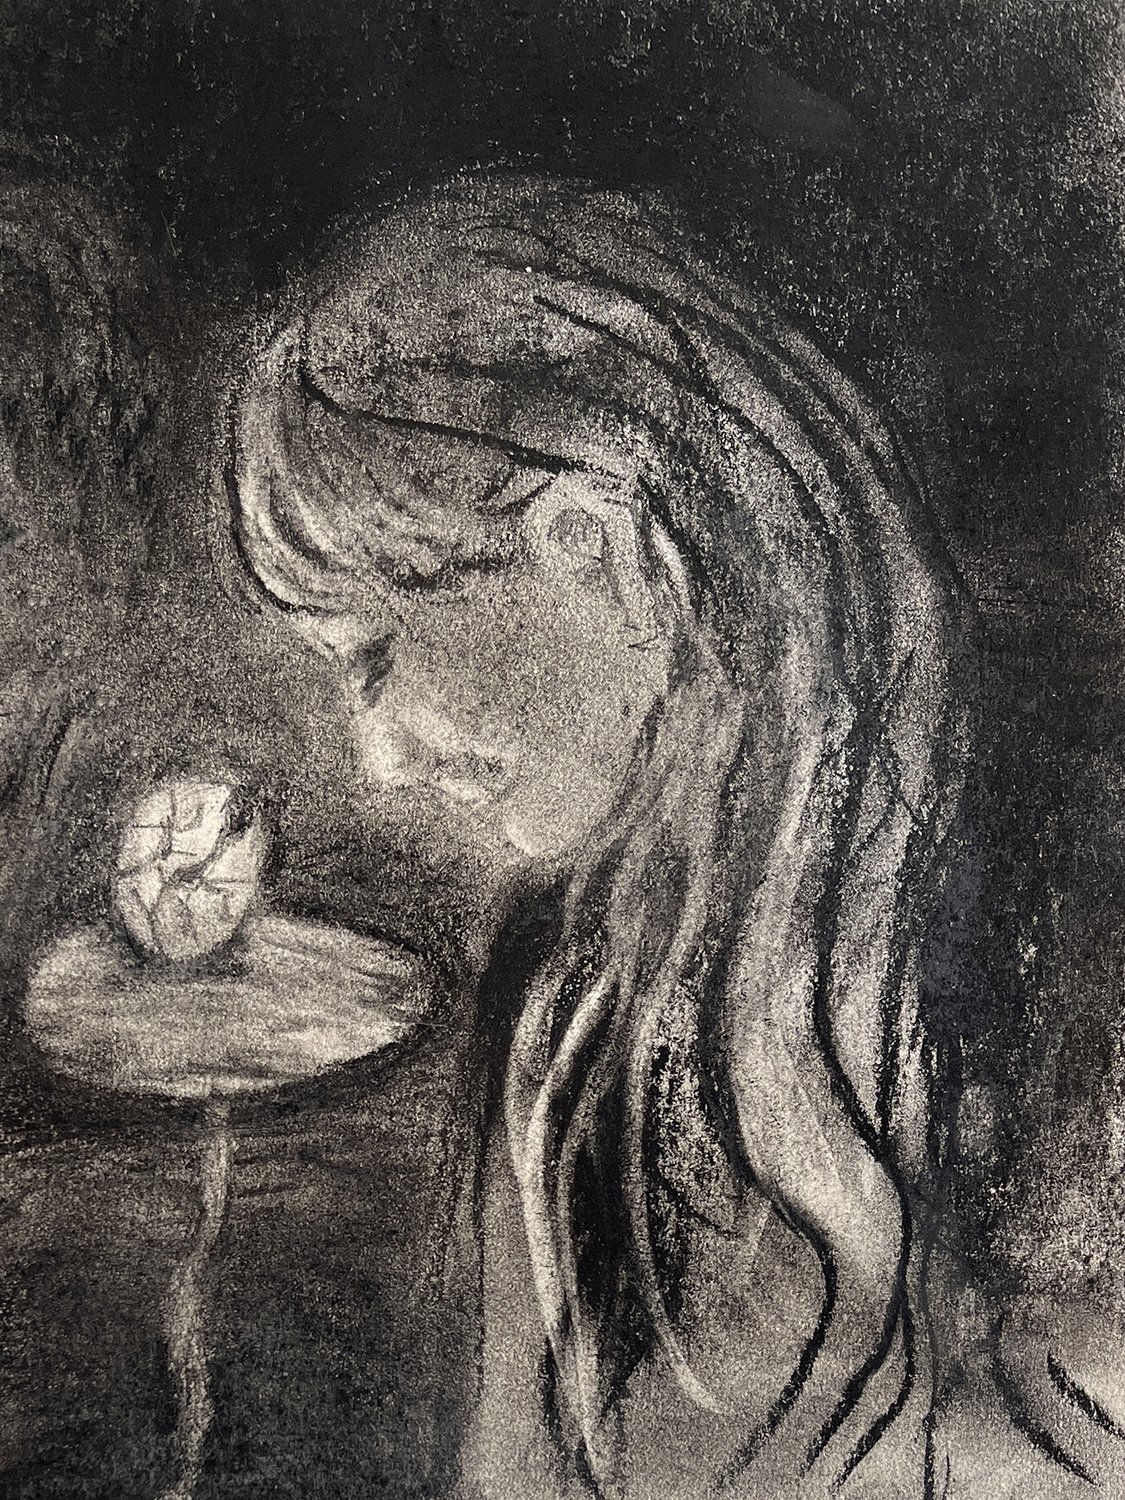 Precious / 2022, charcoal on paper, 30 x 40 cm